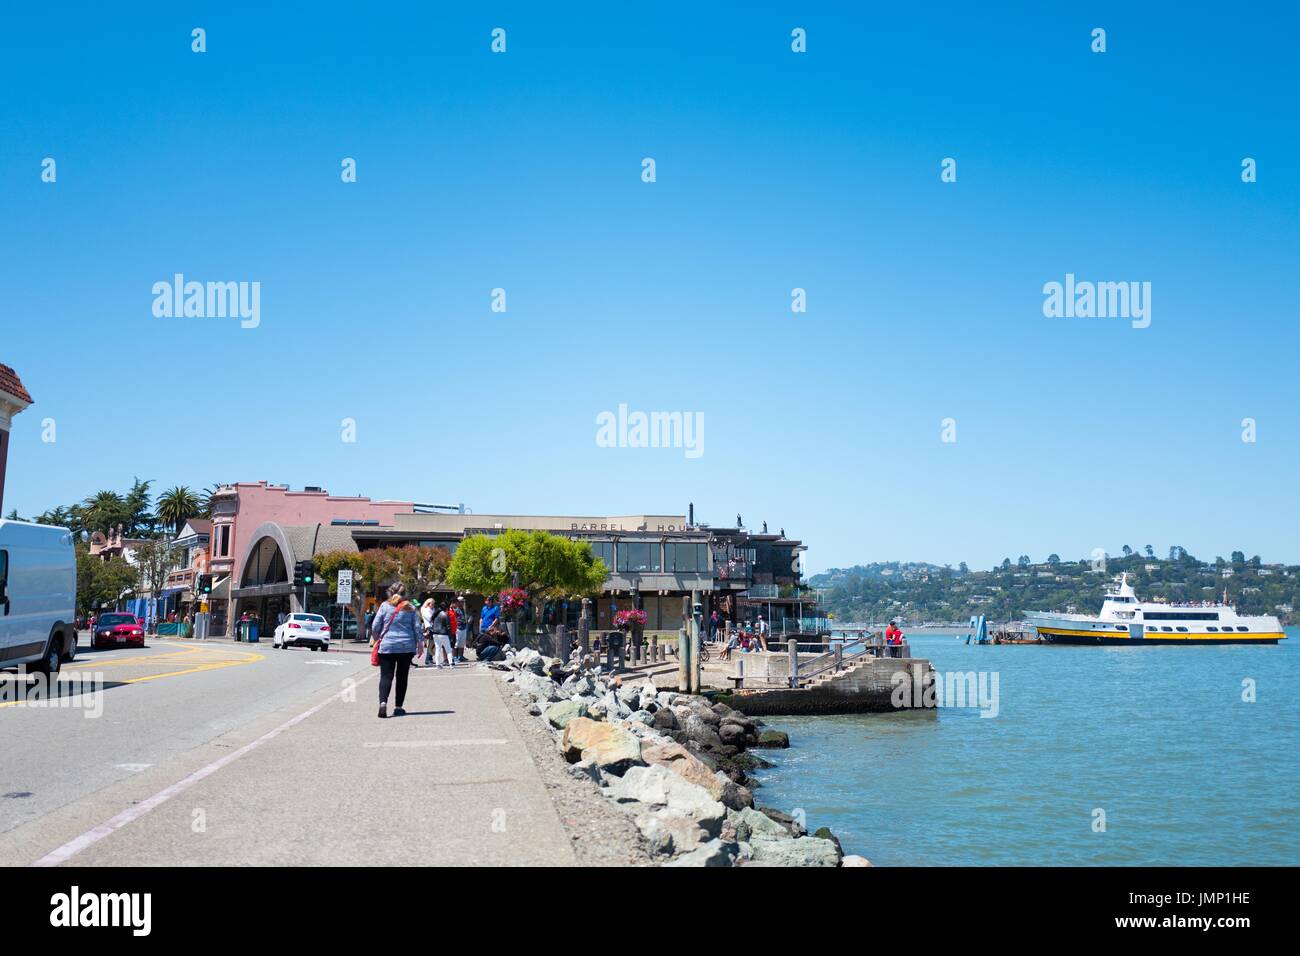 A San Francisco ferry is visible, along with downtown businesses, on Bridgeway Road in the San Francisco Bay Area town of Sausalito, California, June 29, 2017. Stock Photo